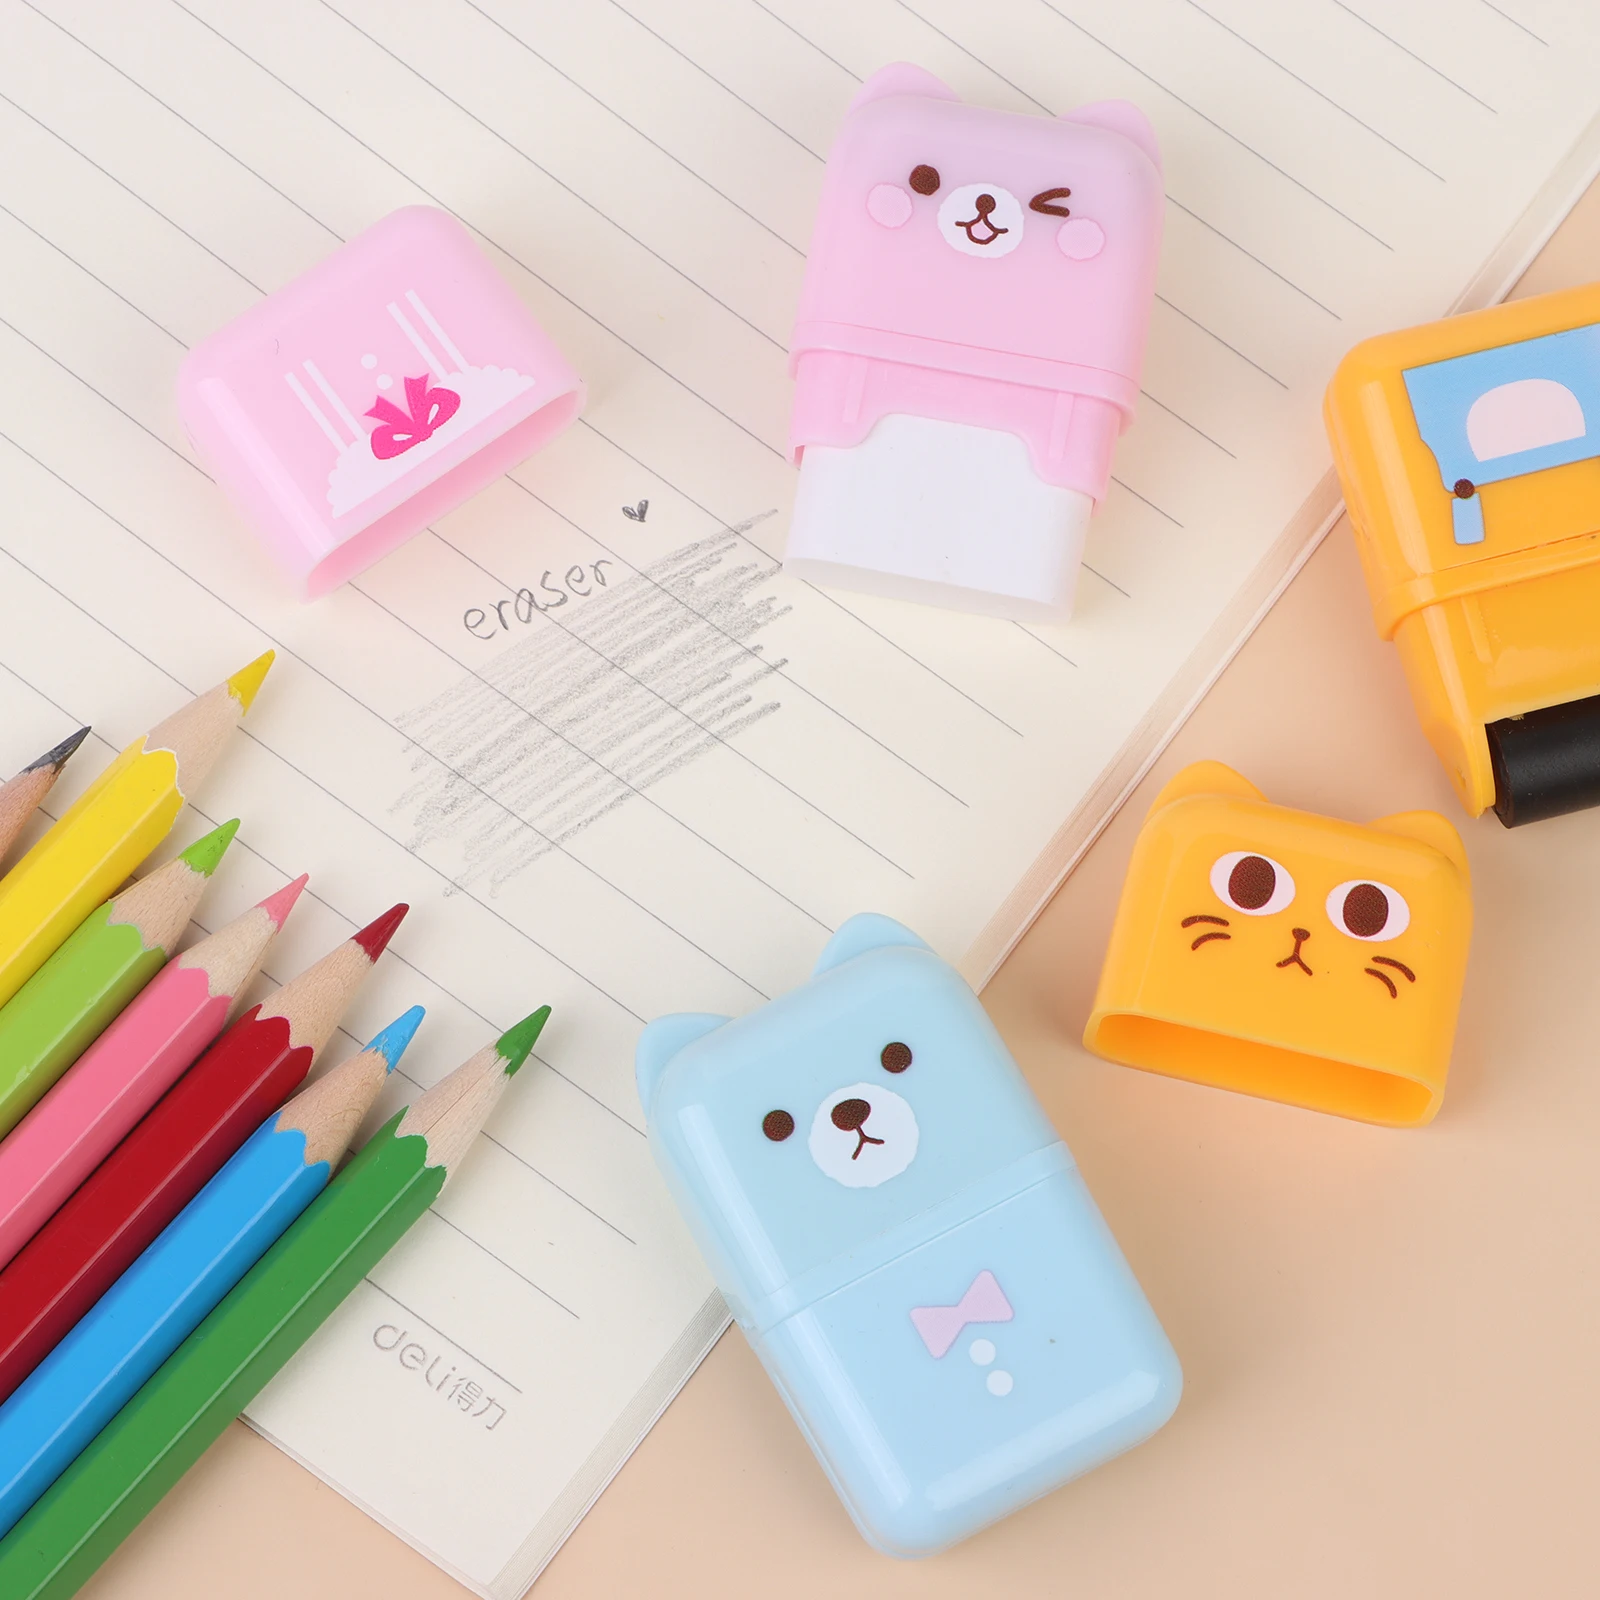 

24pc Cute Cartoon RollerColorful Rectangle Eraser Rubber Students Stationery Kids Gifts School Office Correction Supplies Eraser